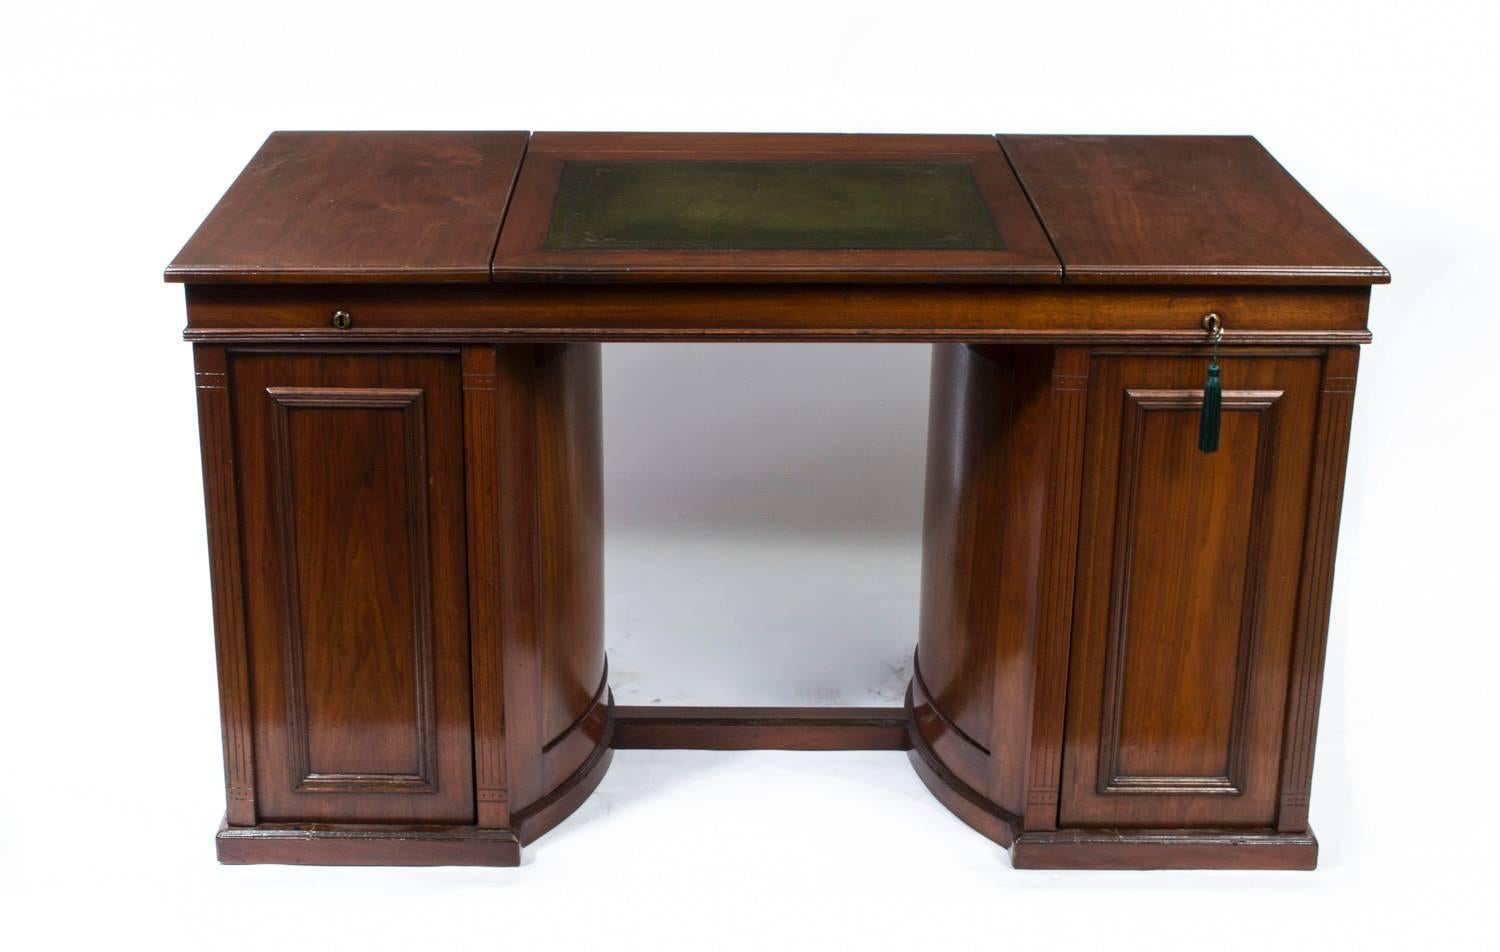 his is an exquisite English Antique Victorian flame mahogany pedestal desk, Circa 1870 in date. 

It has a central hinged top inset sage green and gold tooled leather writing surface above a pair of pedestals fitted with Wooton style swivel action